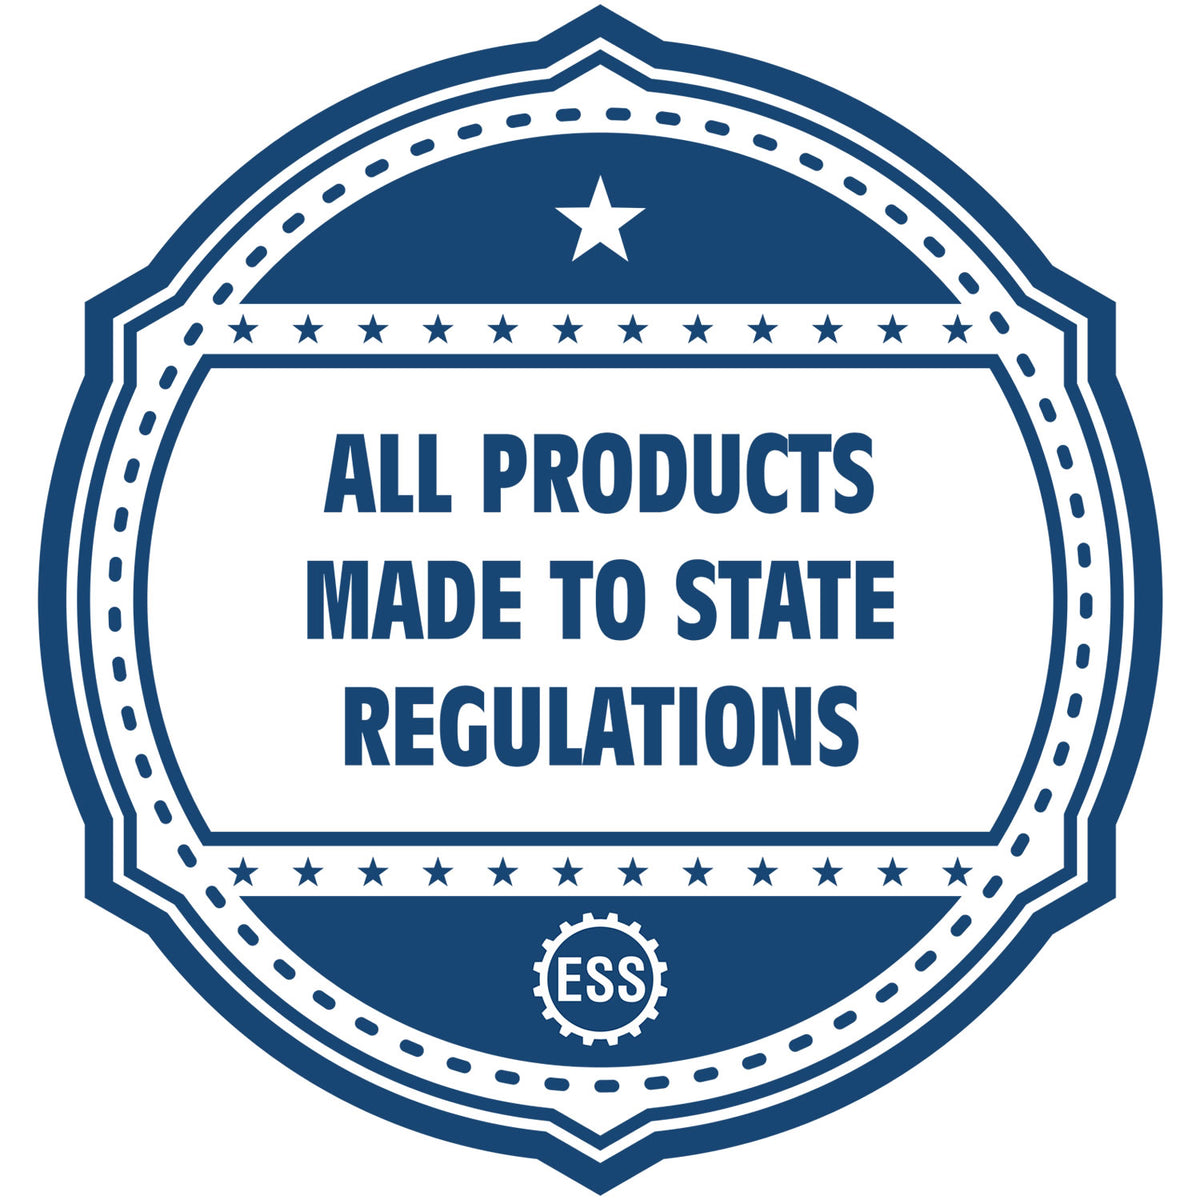 An icon or badge element for the PSI Idaho Notary Stamp showing that this product is made in compliance with state regulations.